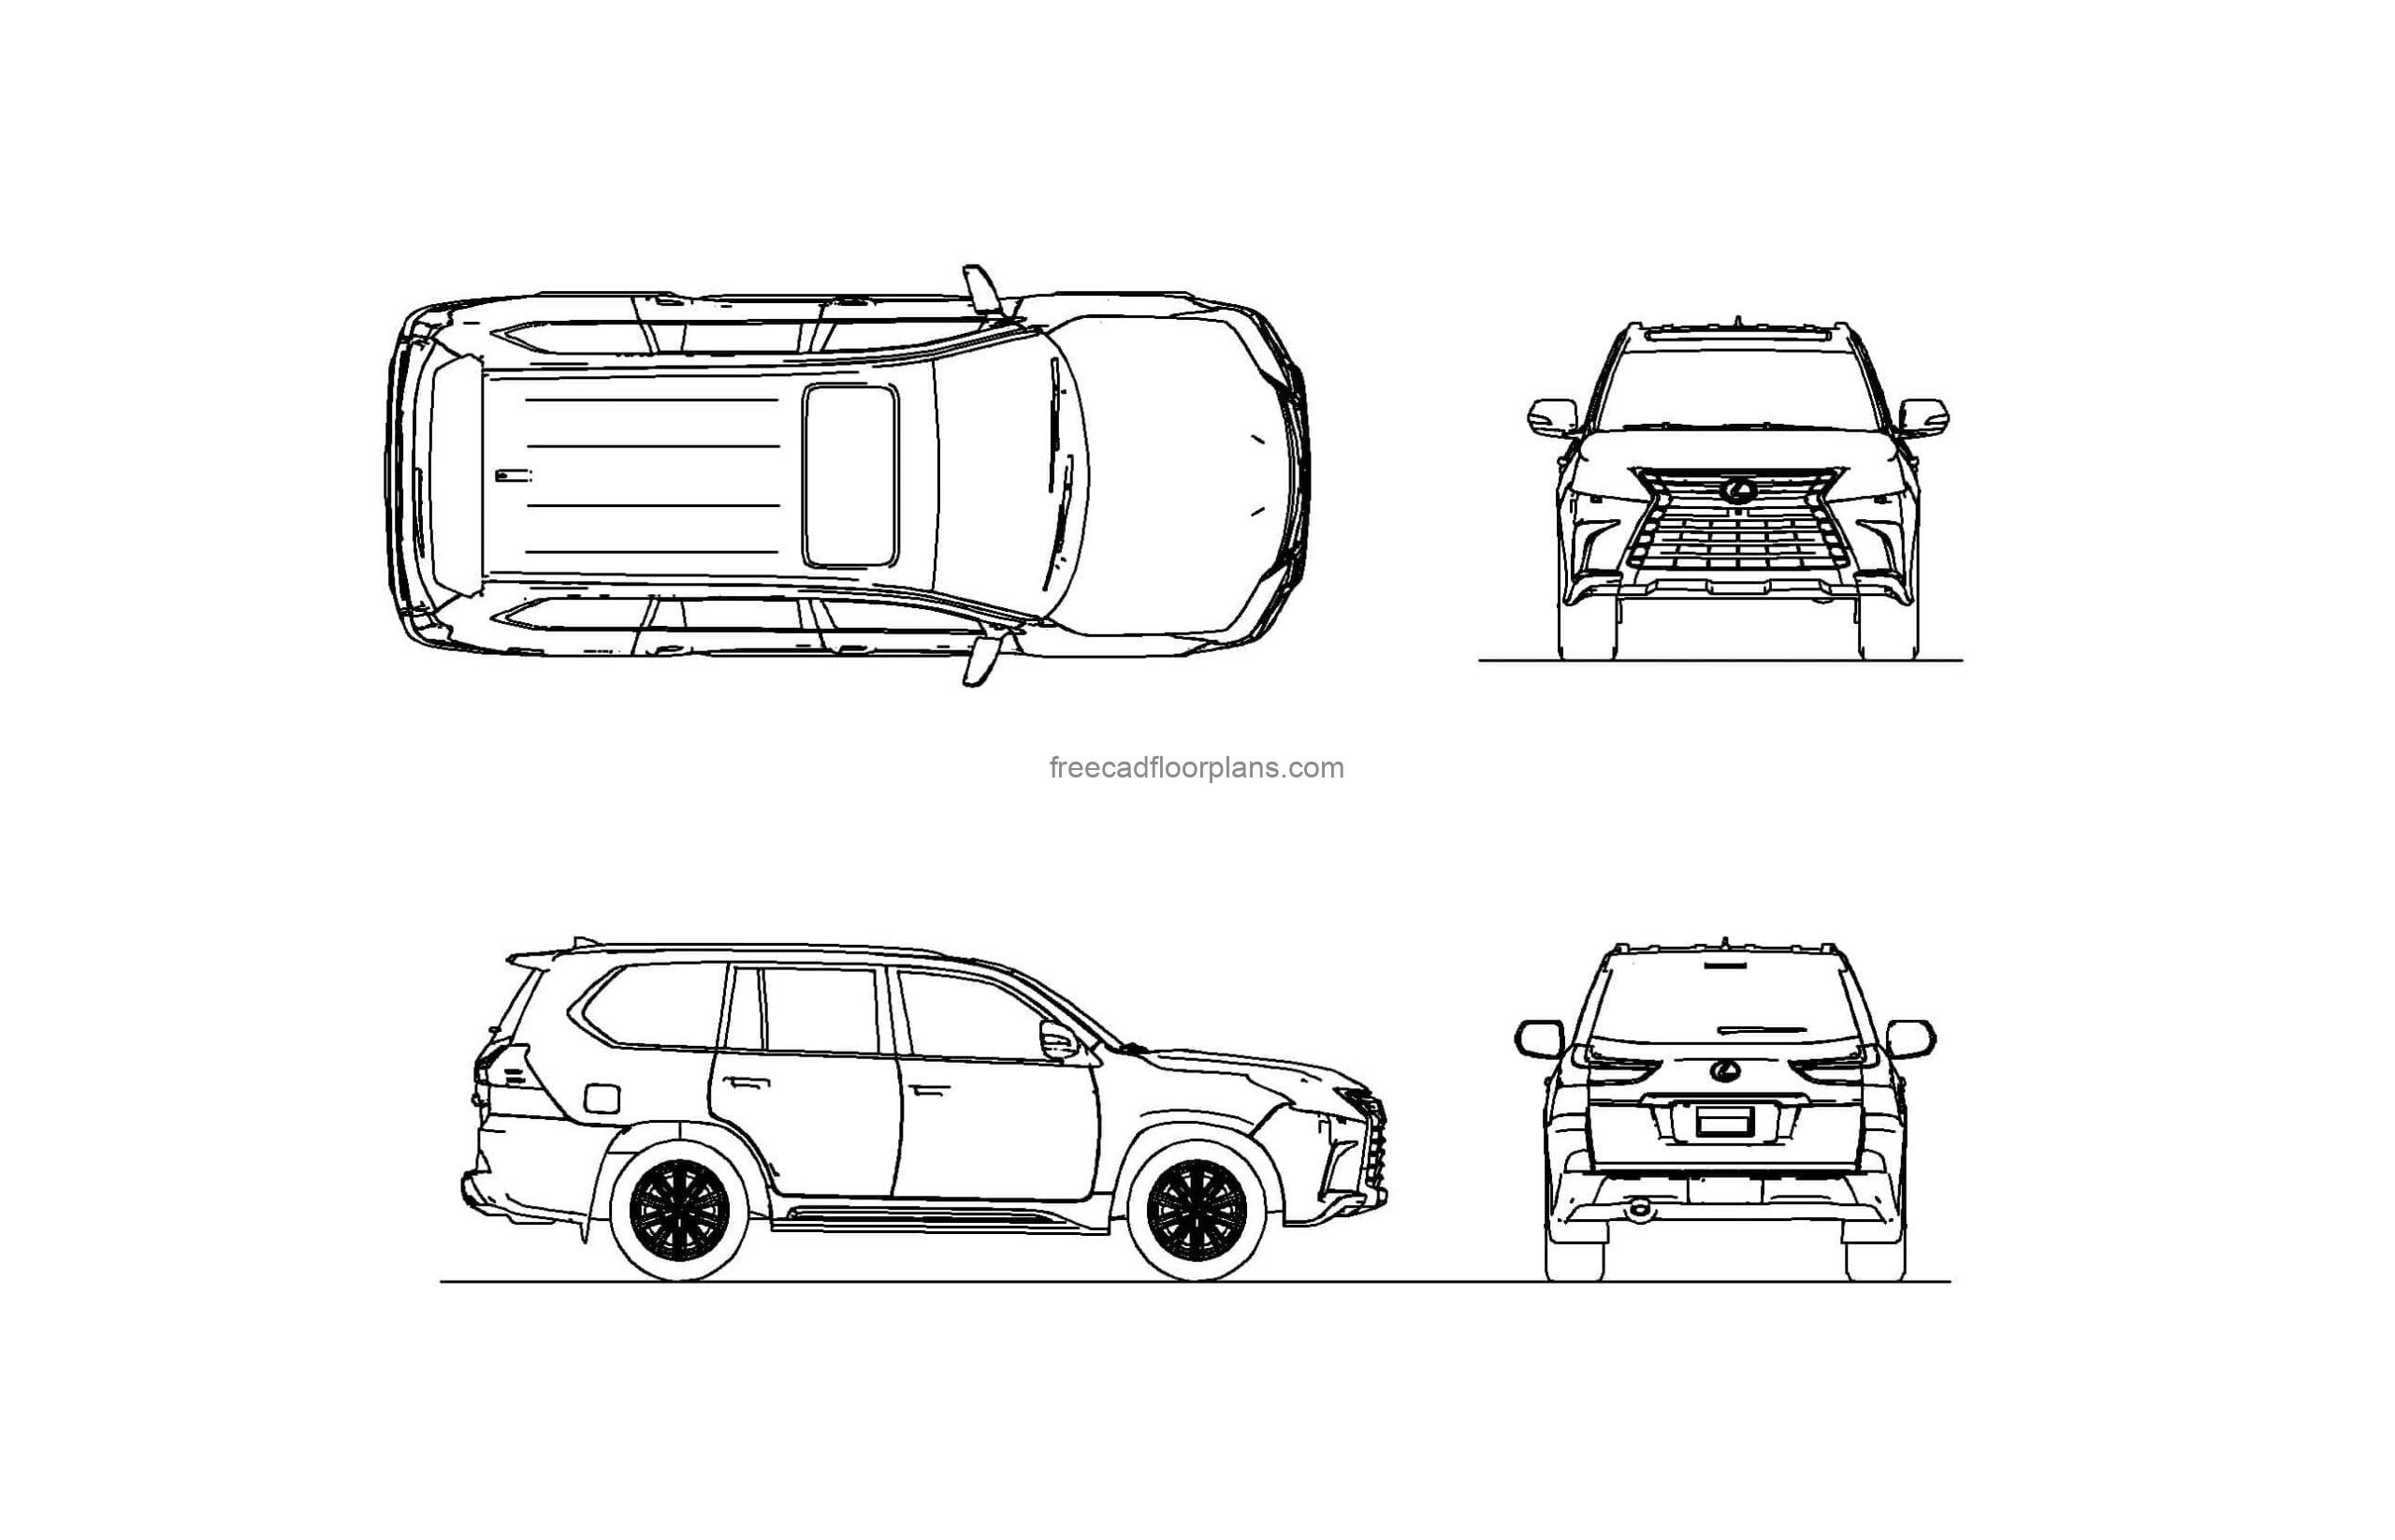 lexus lx autocad drawing, 2d plan and elevations views, dwg file for free download